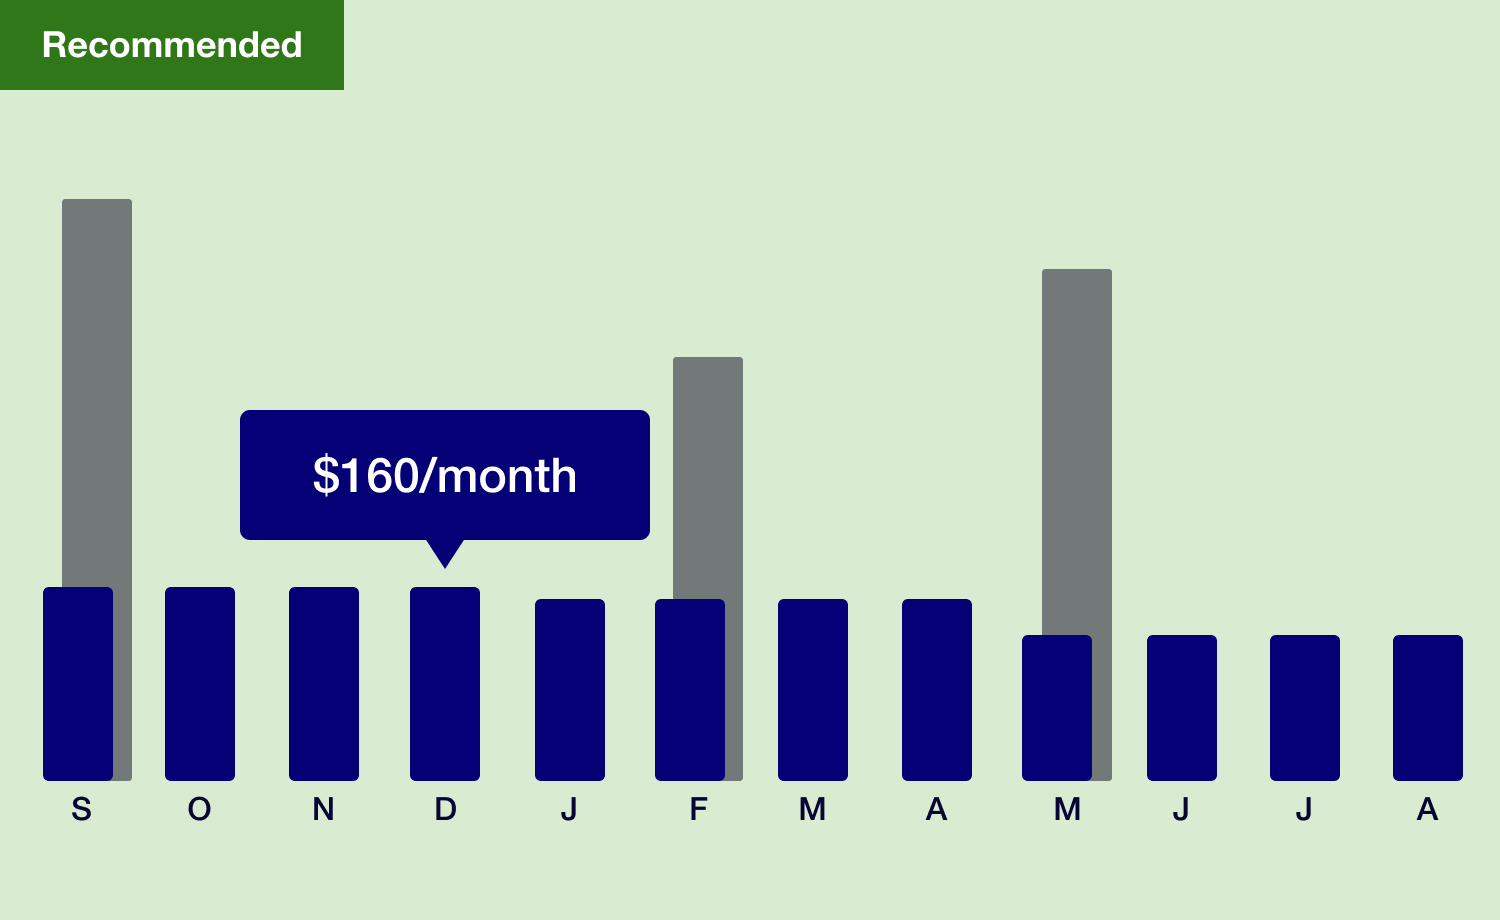 Bar graph comparing pay per month to pay per delivery, showing that pay per month standardizes payment amount regardless of spikes in usage. Where as pay per delivery can result in drastic changes in monthly payments. This is the recommended plan.